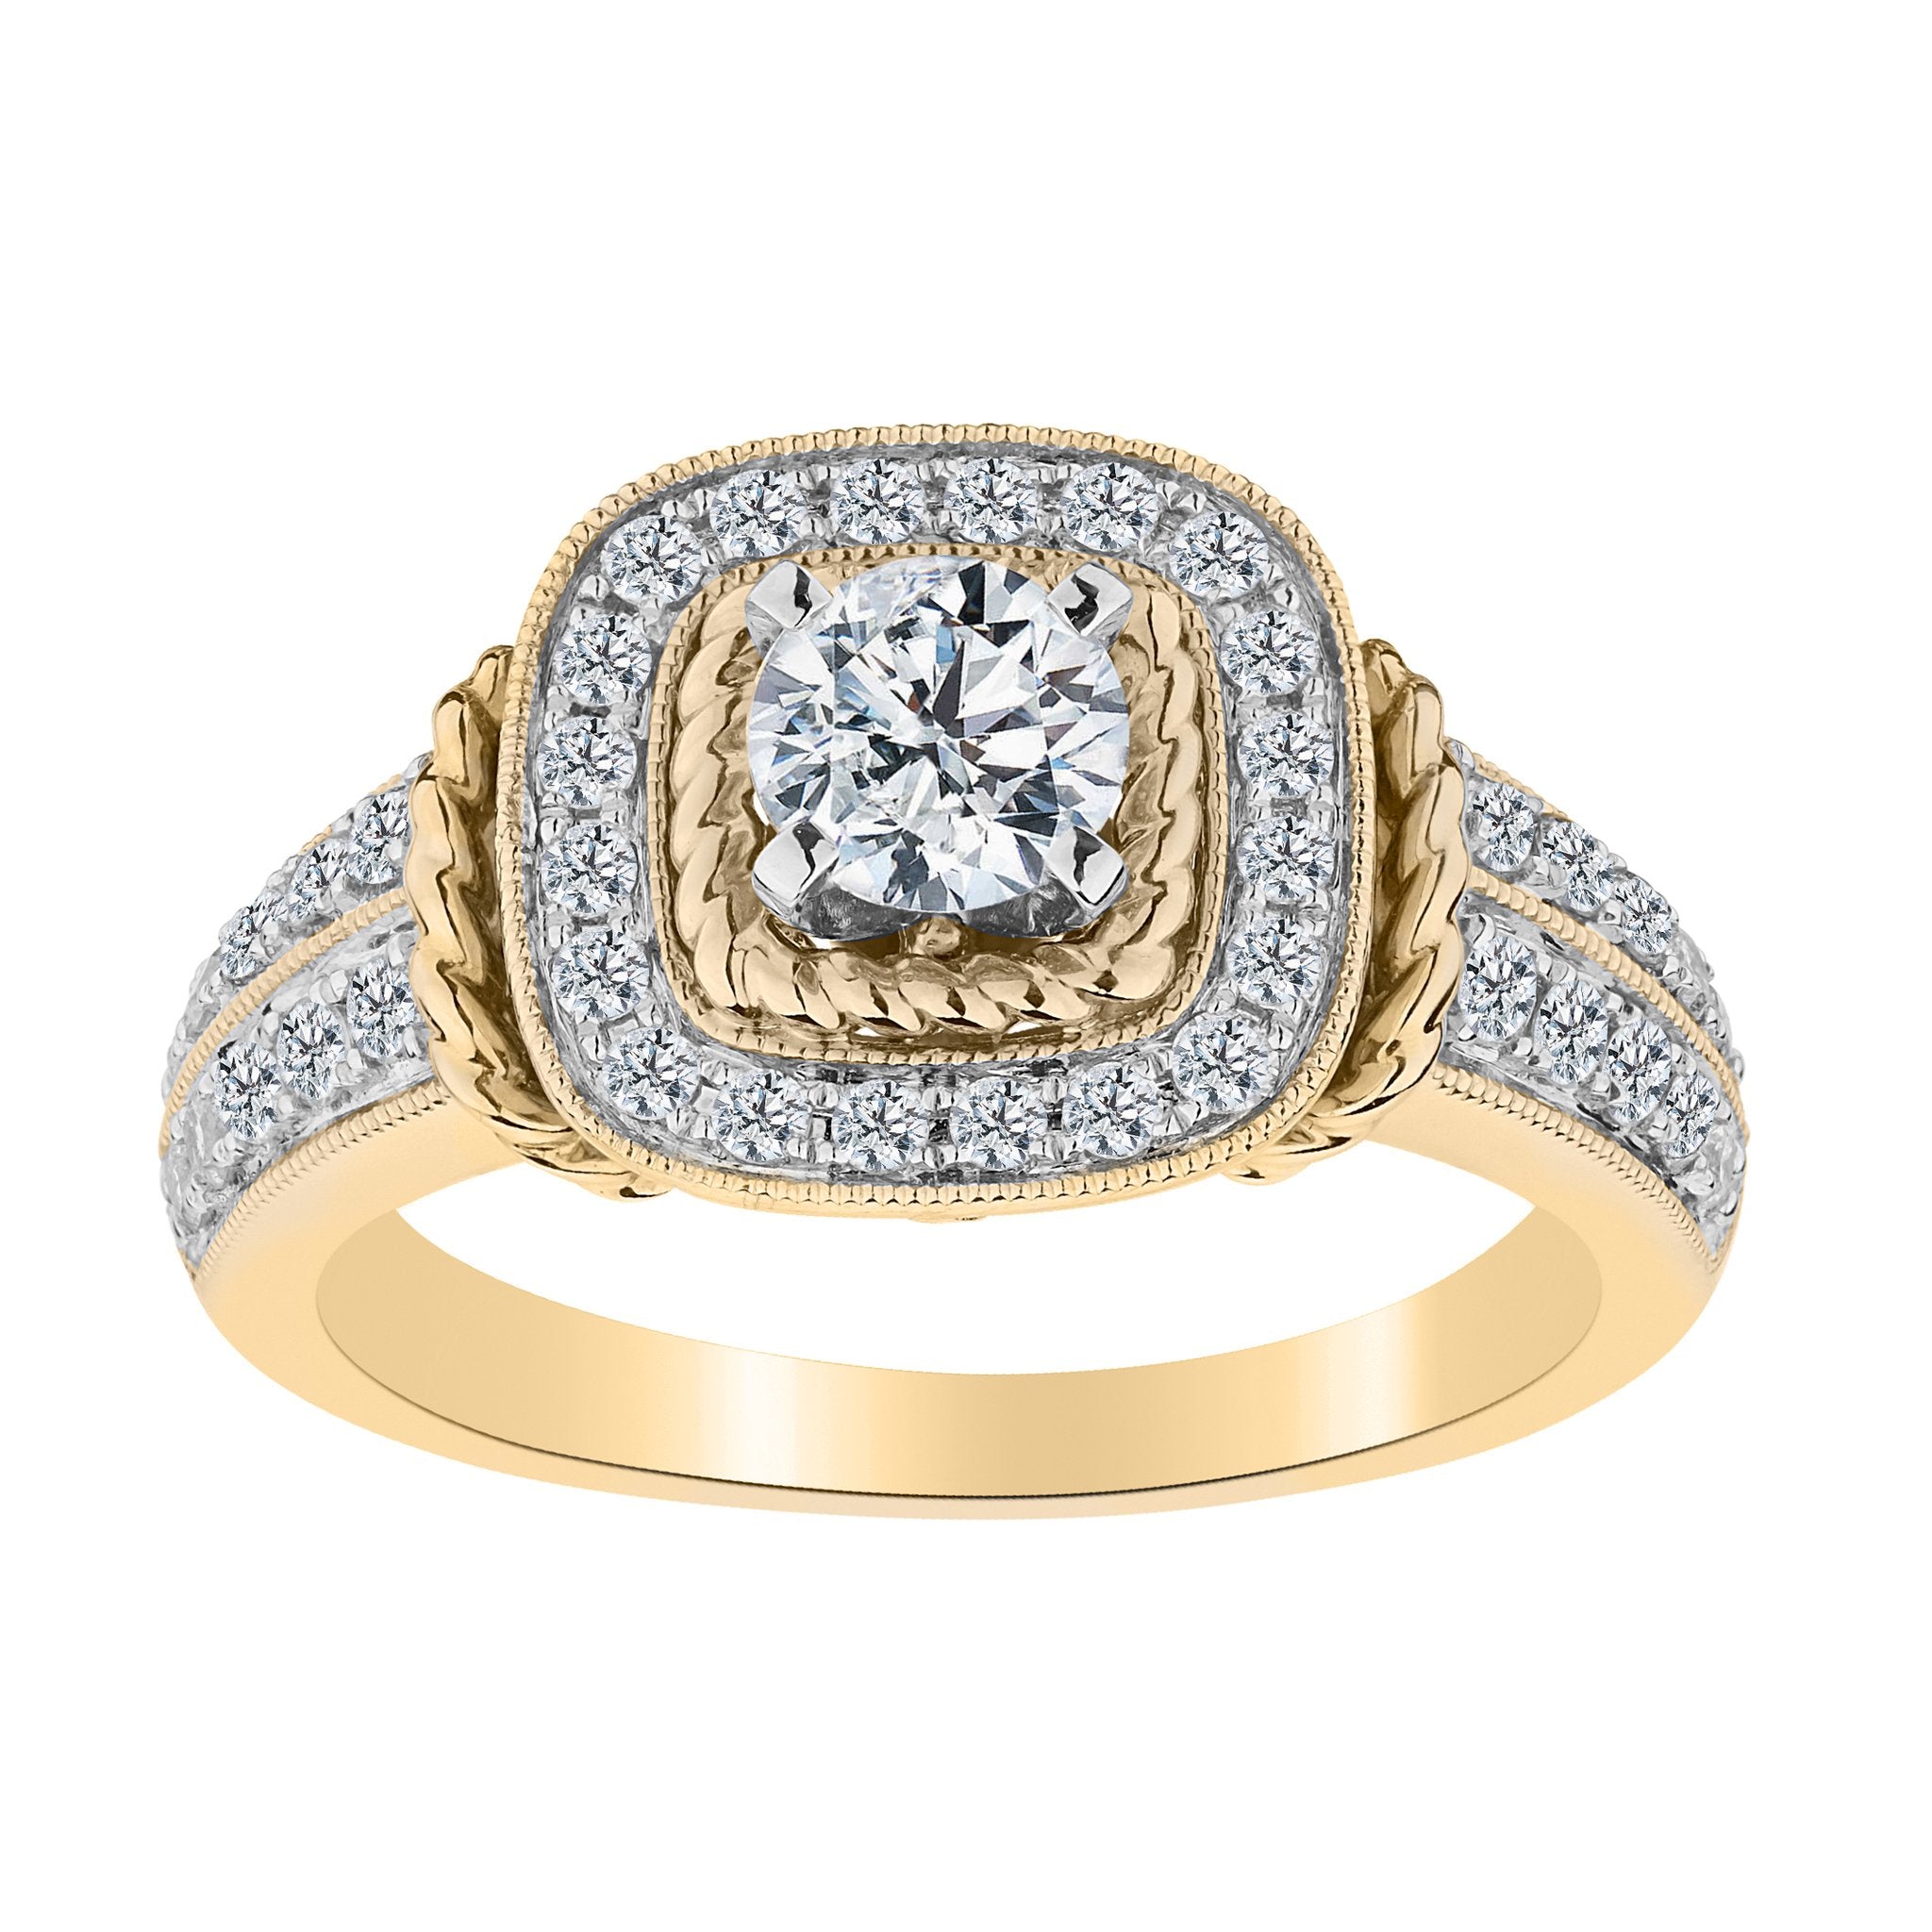 1.00 CARAT DIAMOND RING, 10kt YELLOW GOLD.....................NOW - Griffin Jewellery Designs